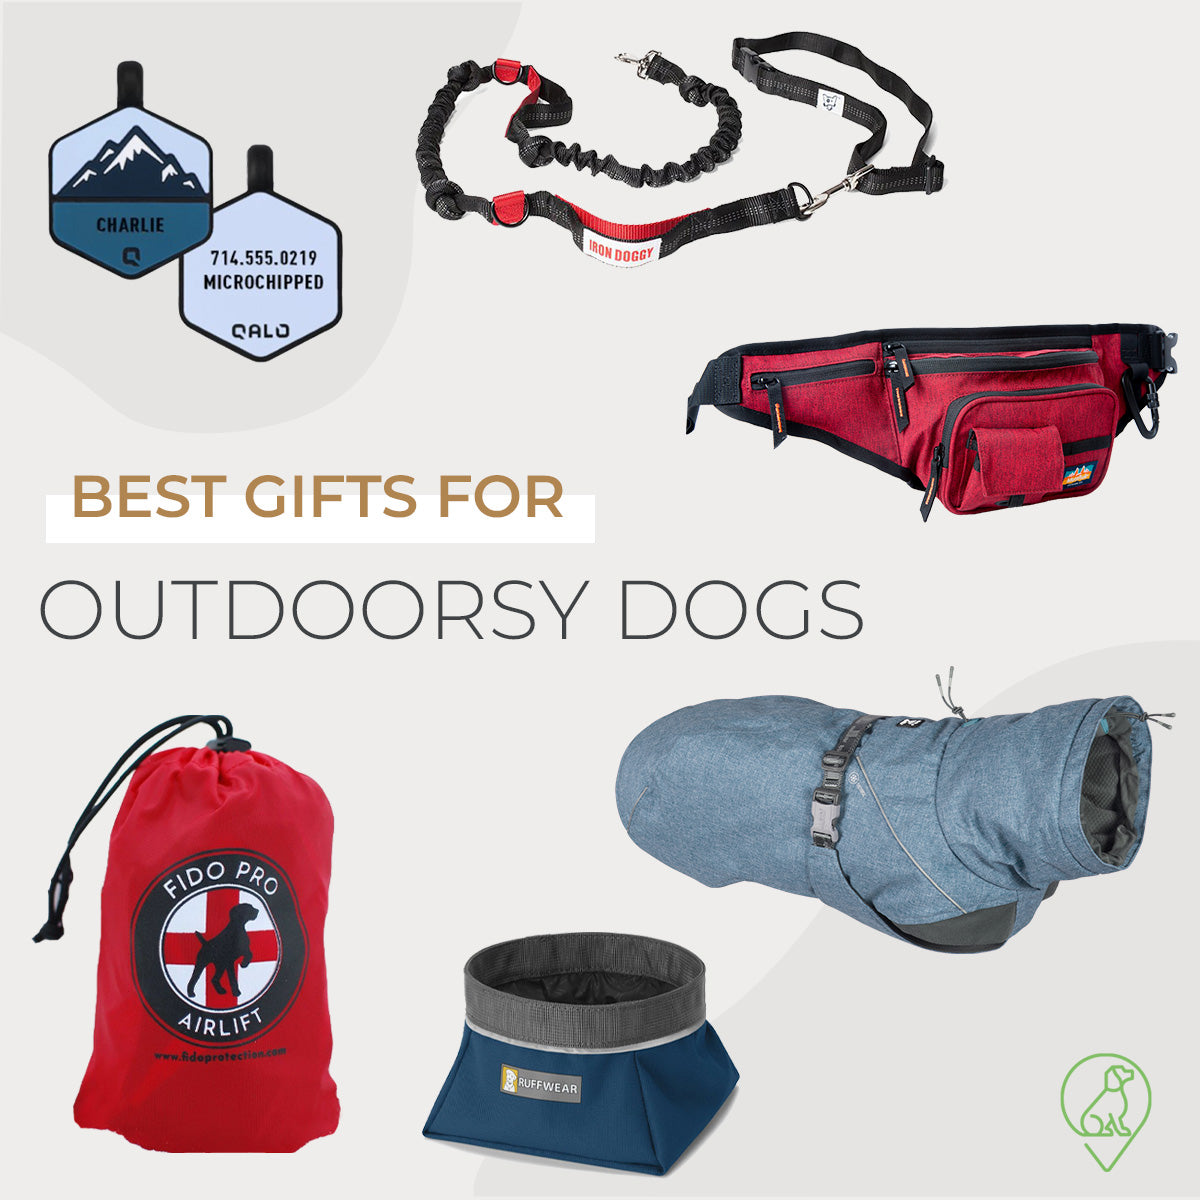 Top Outdoor Dog Gifts: 10 Ideas for the Adventurous Pup